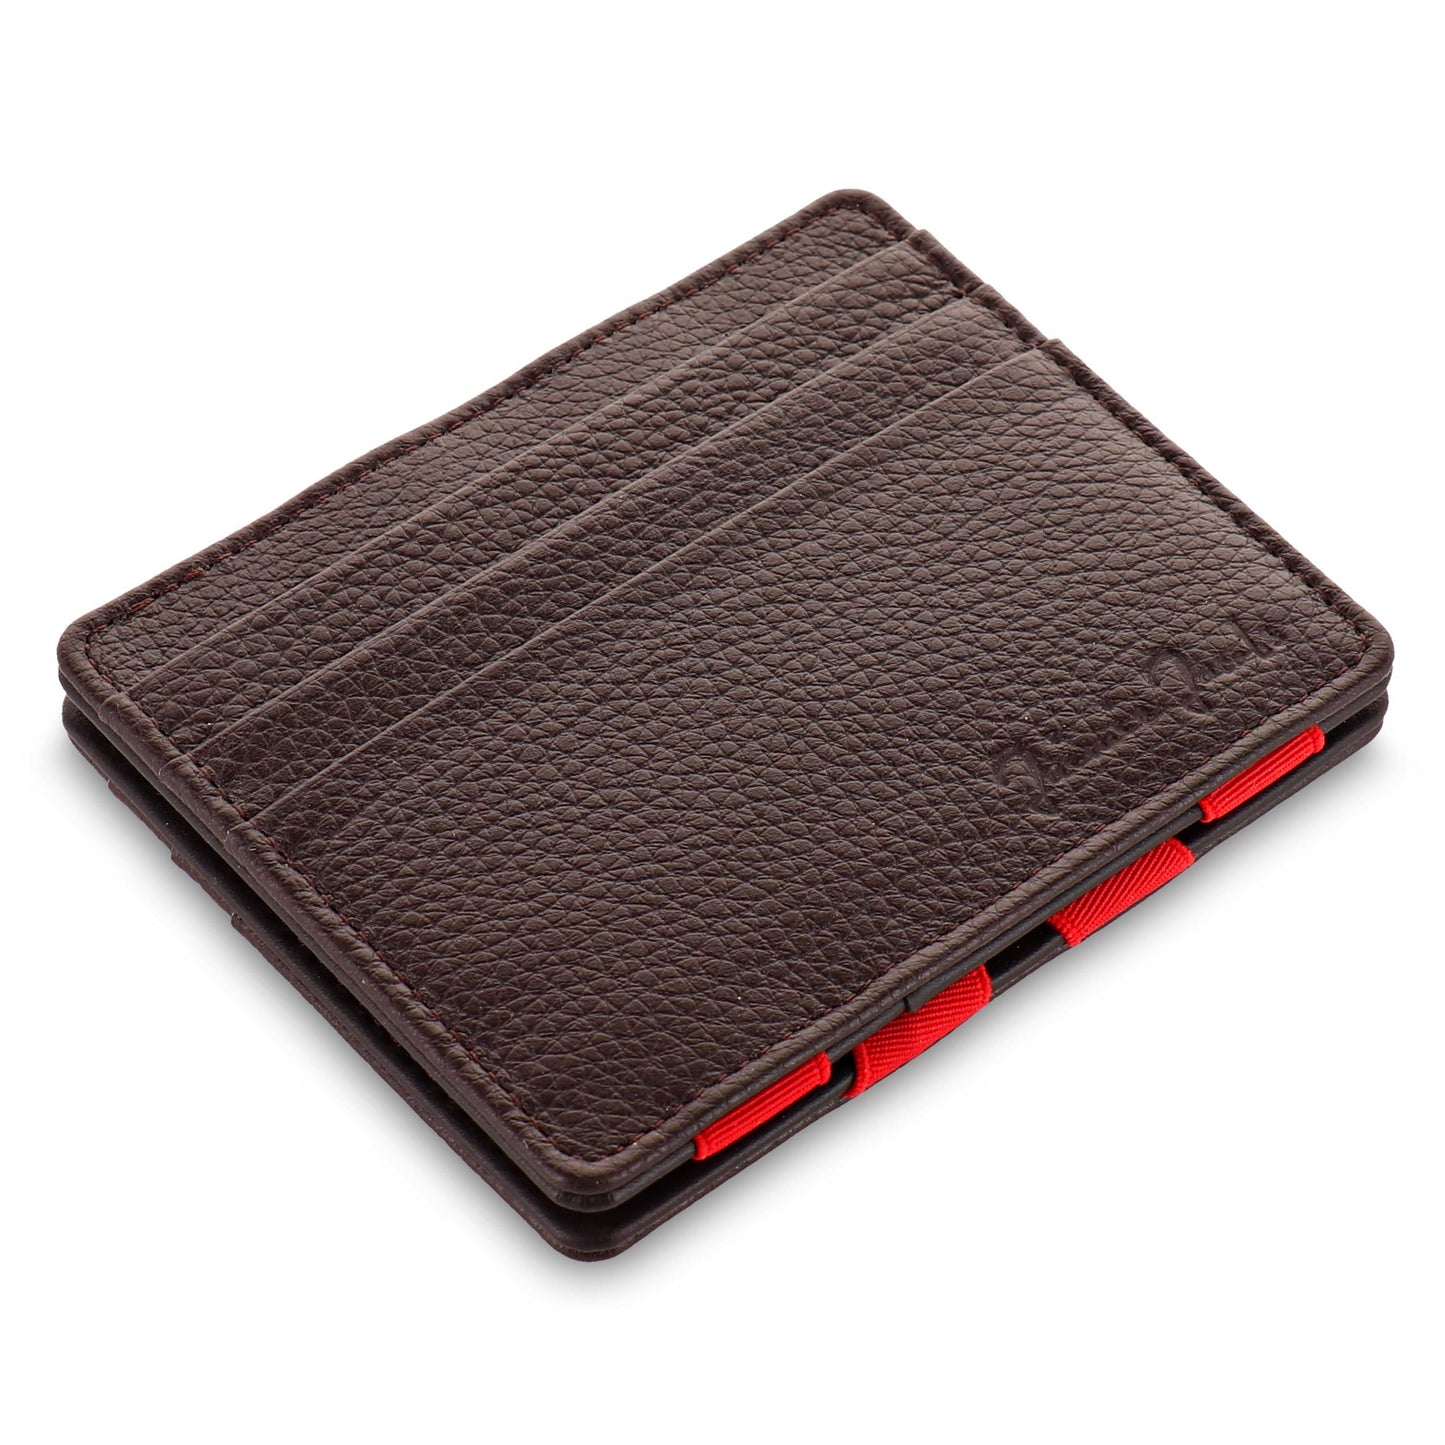 Jaimie Jacobs Geldbeutel Grained Leather Brown with Red Flap Boy Slim Limited Edition - Magic Wallet without Coin Pocket jamy jamie jami jakobs